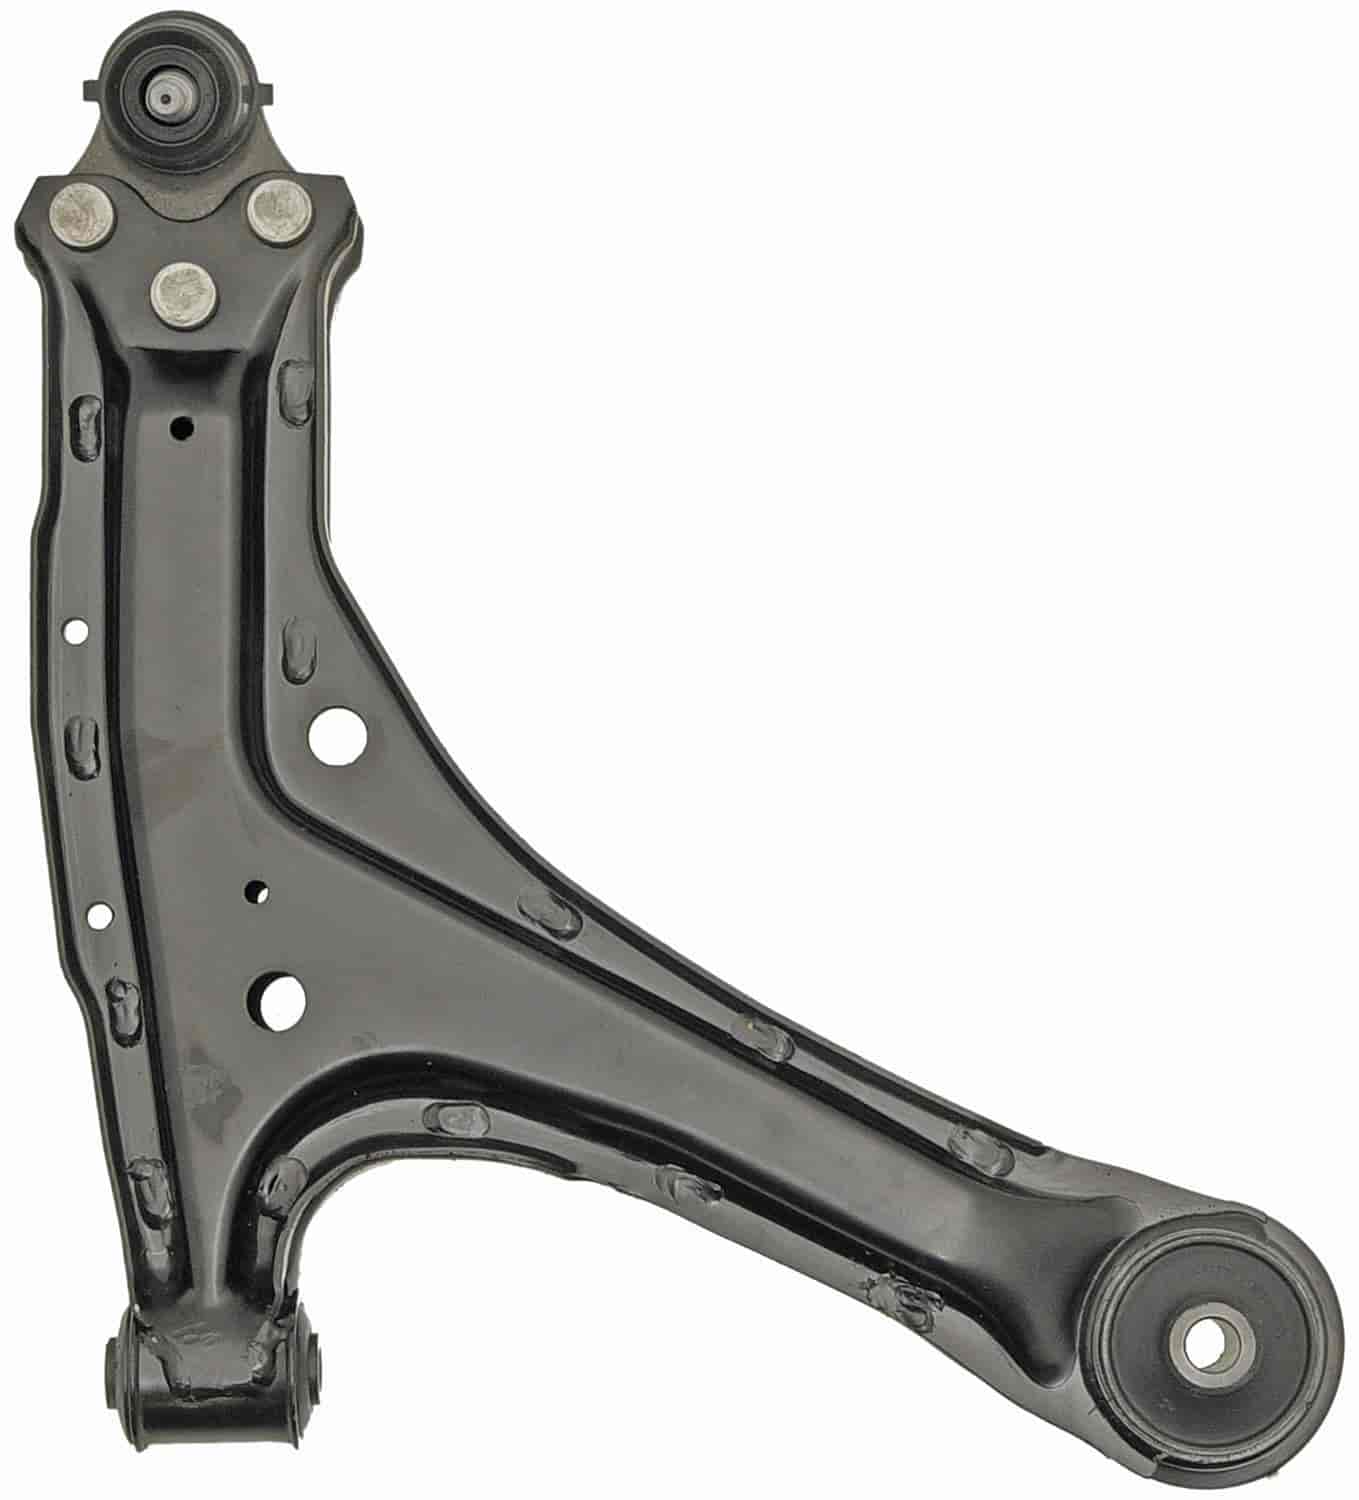 Lower Control Arm 1997-2004 Oldsmobile, 1997-2005 Chevy,